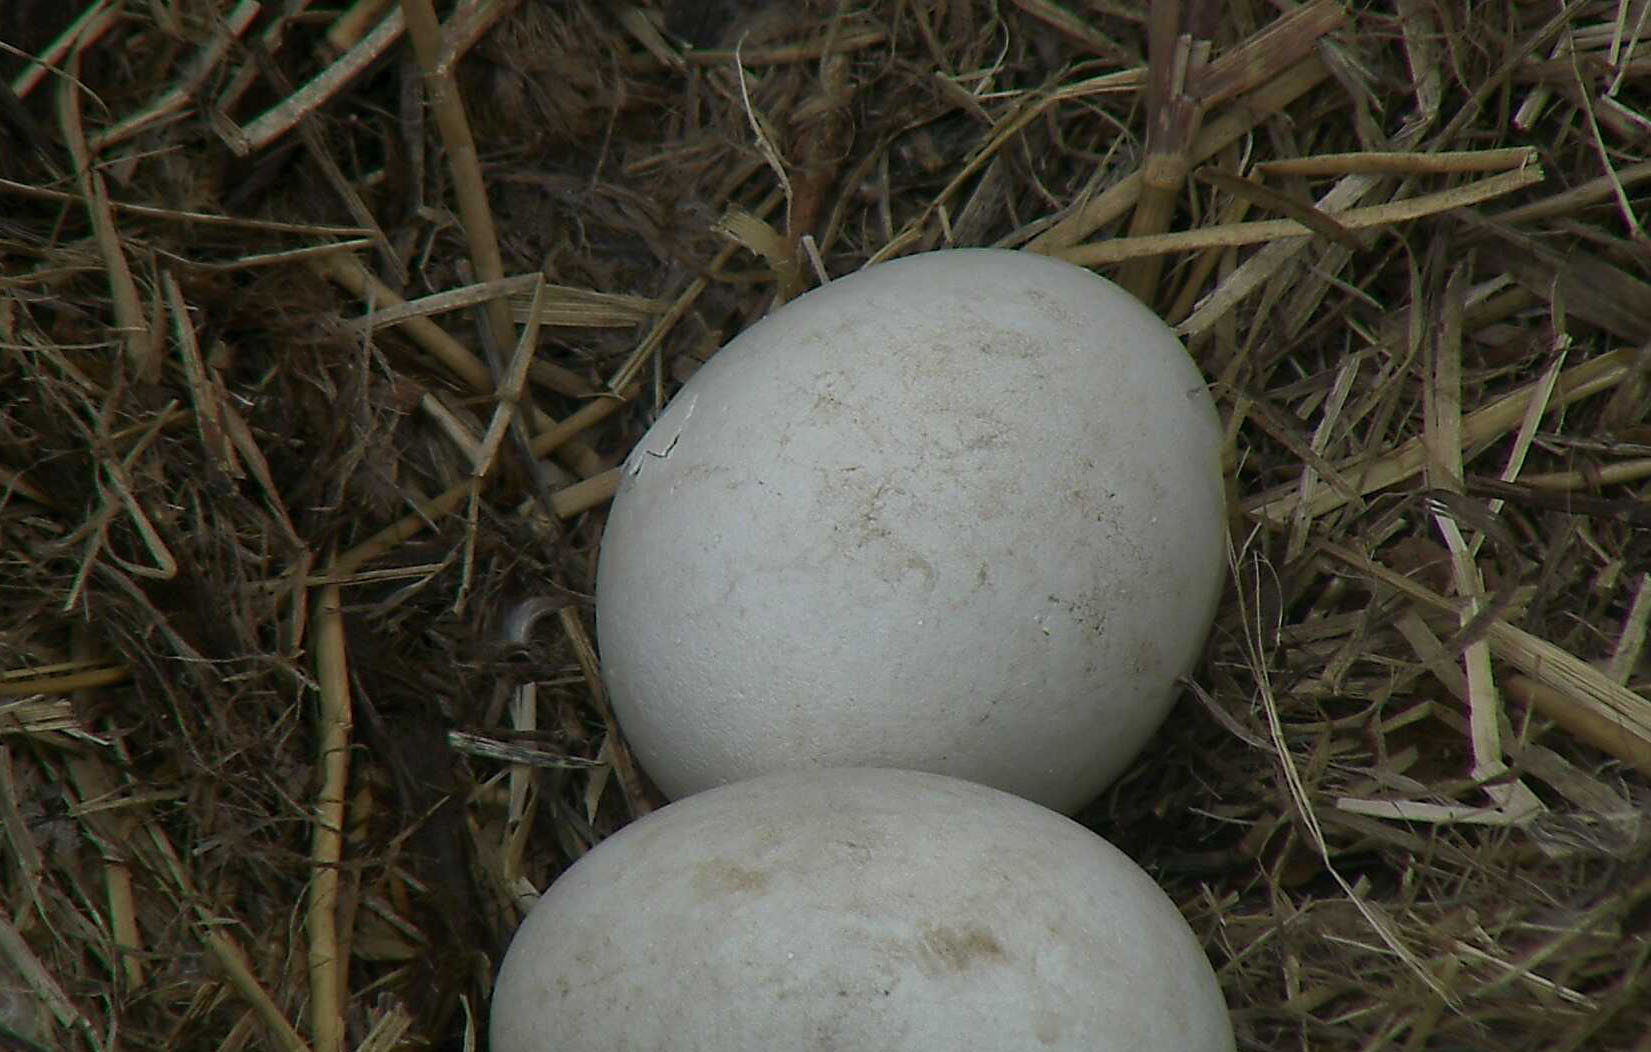 The first crack in the egg, known as a "pip," is located on the left side of the upper egg. The full hatching process can take between 24-48 hours. (© 2017 American Eagle Foundation, DCEAGLECAM.ORG)